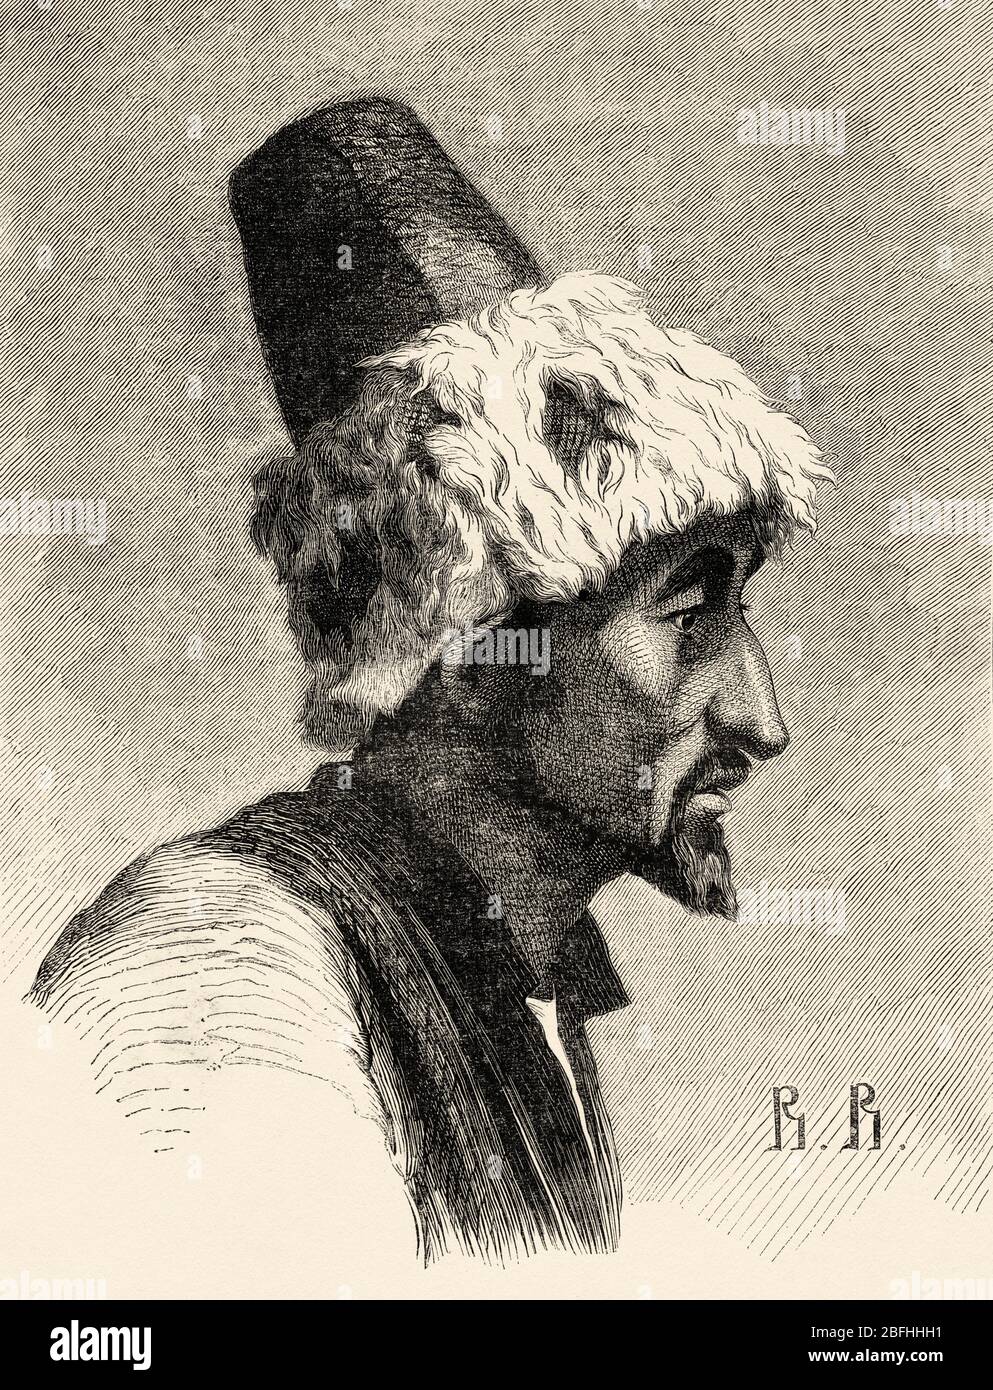 Portrait of a Nogais man. Turkic ethnic group who live in the Russian North Caucasus region, Russia. Old engraving illustration, Travel to Free Russia Stock Photo